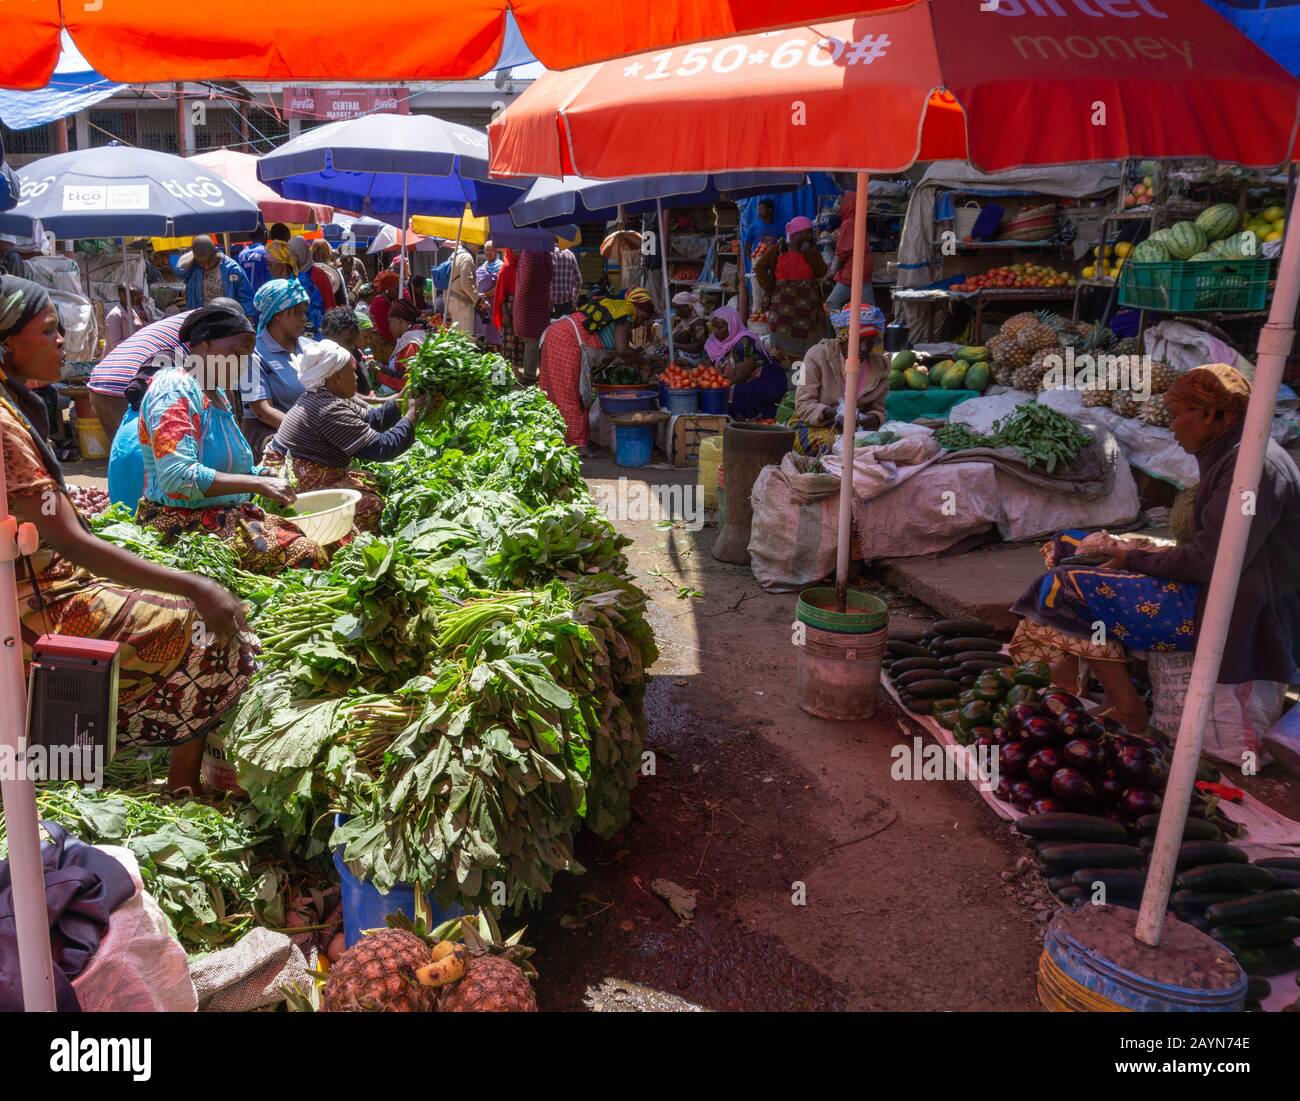 ARUSHA, TANZANIA - AUGUST 16, 2017: people at the central market of Arusha Stock Photo